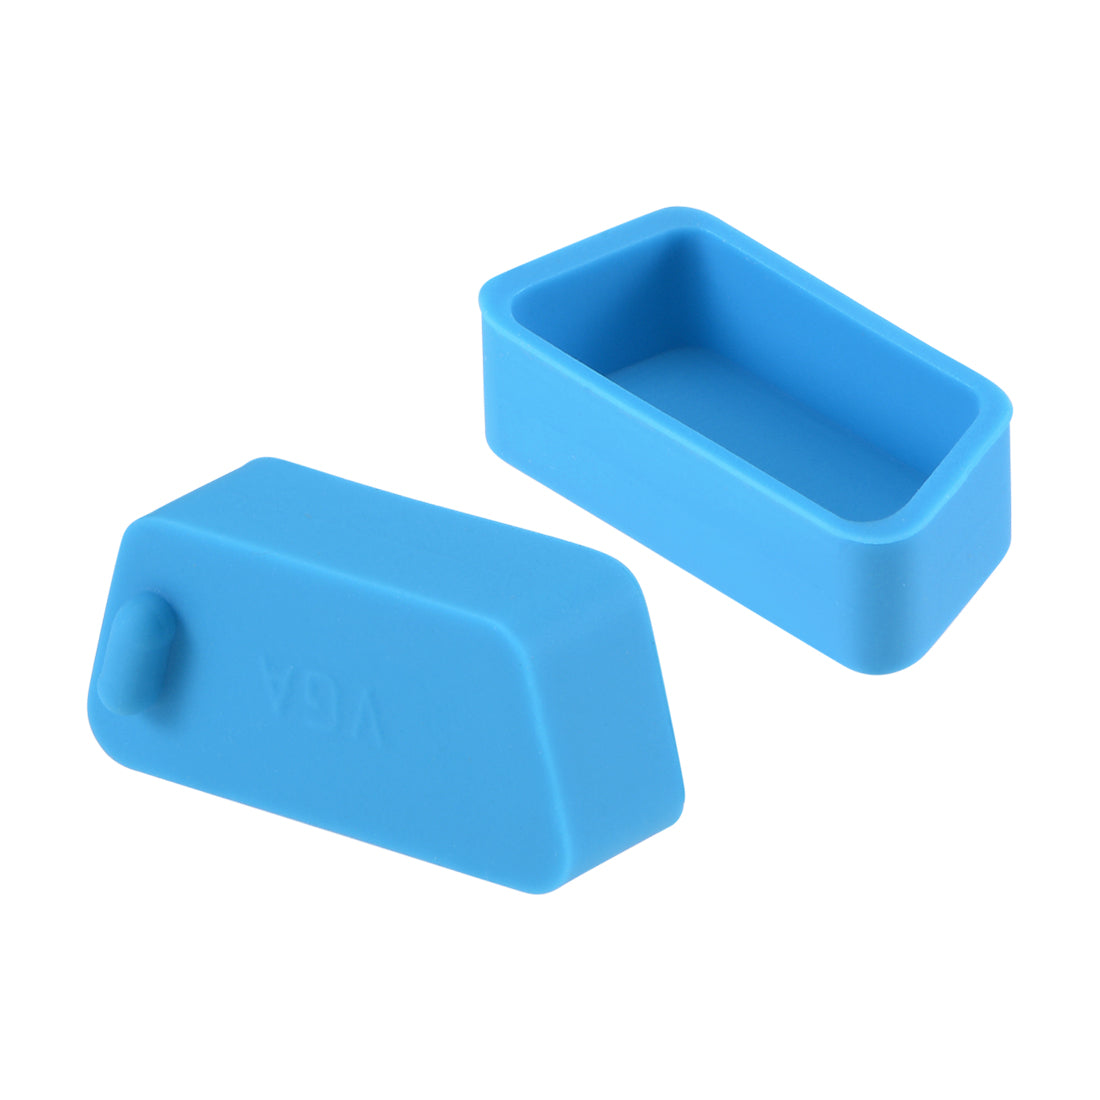 uxcell Uxcell 10pcs VGA Port Cover Silicone Anti Dust Protectors Cap for DB9, Blue